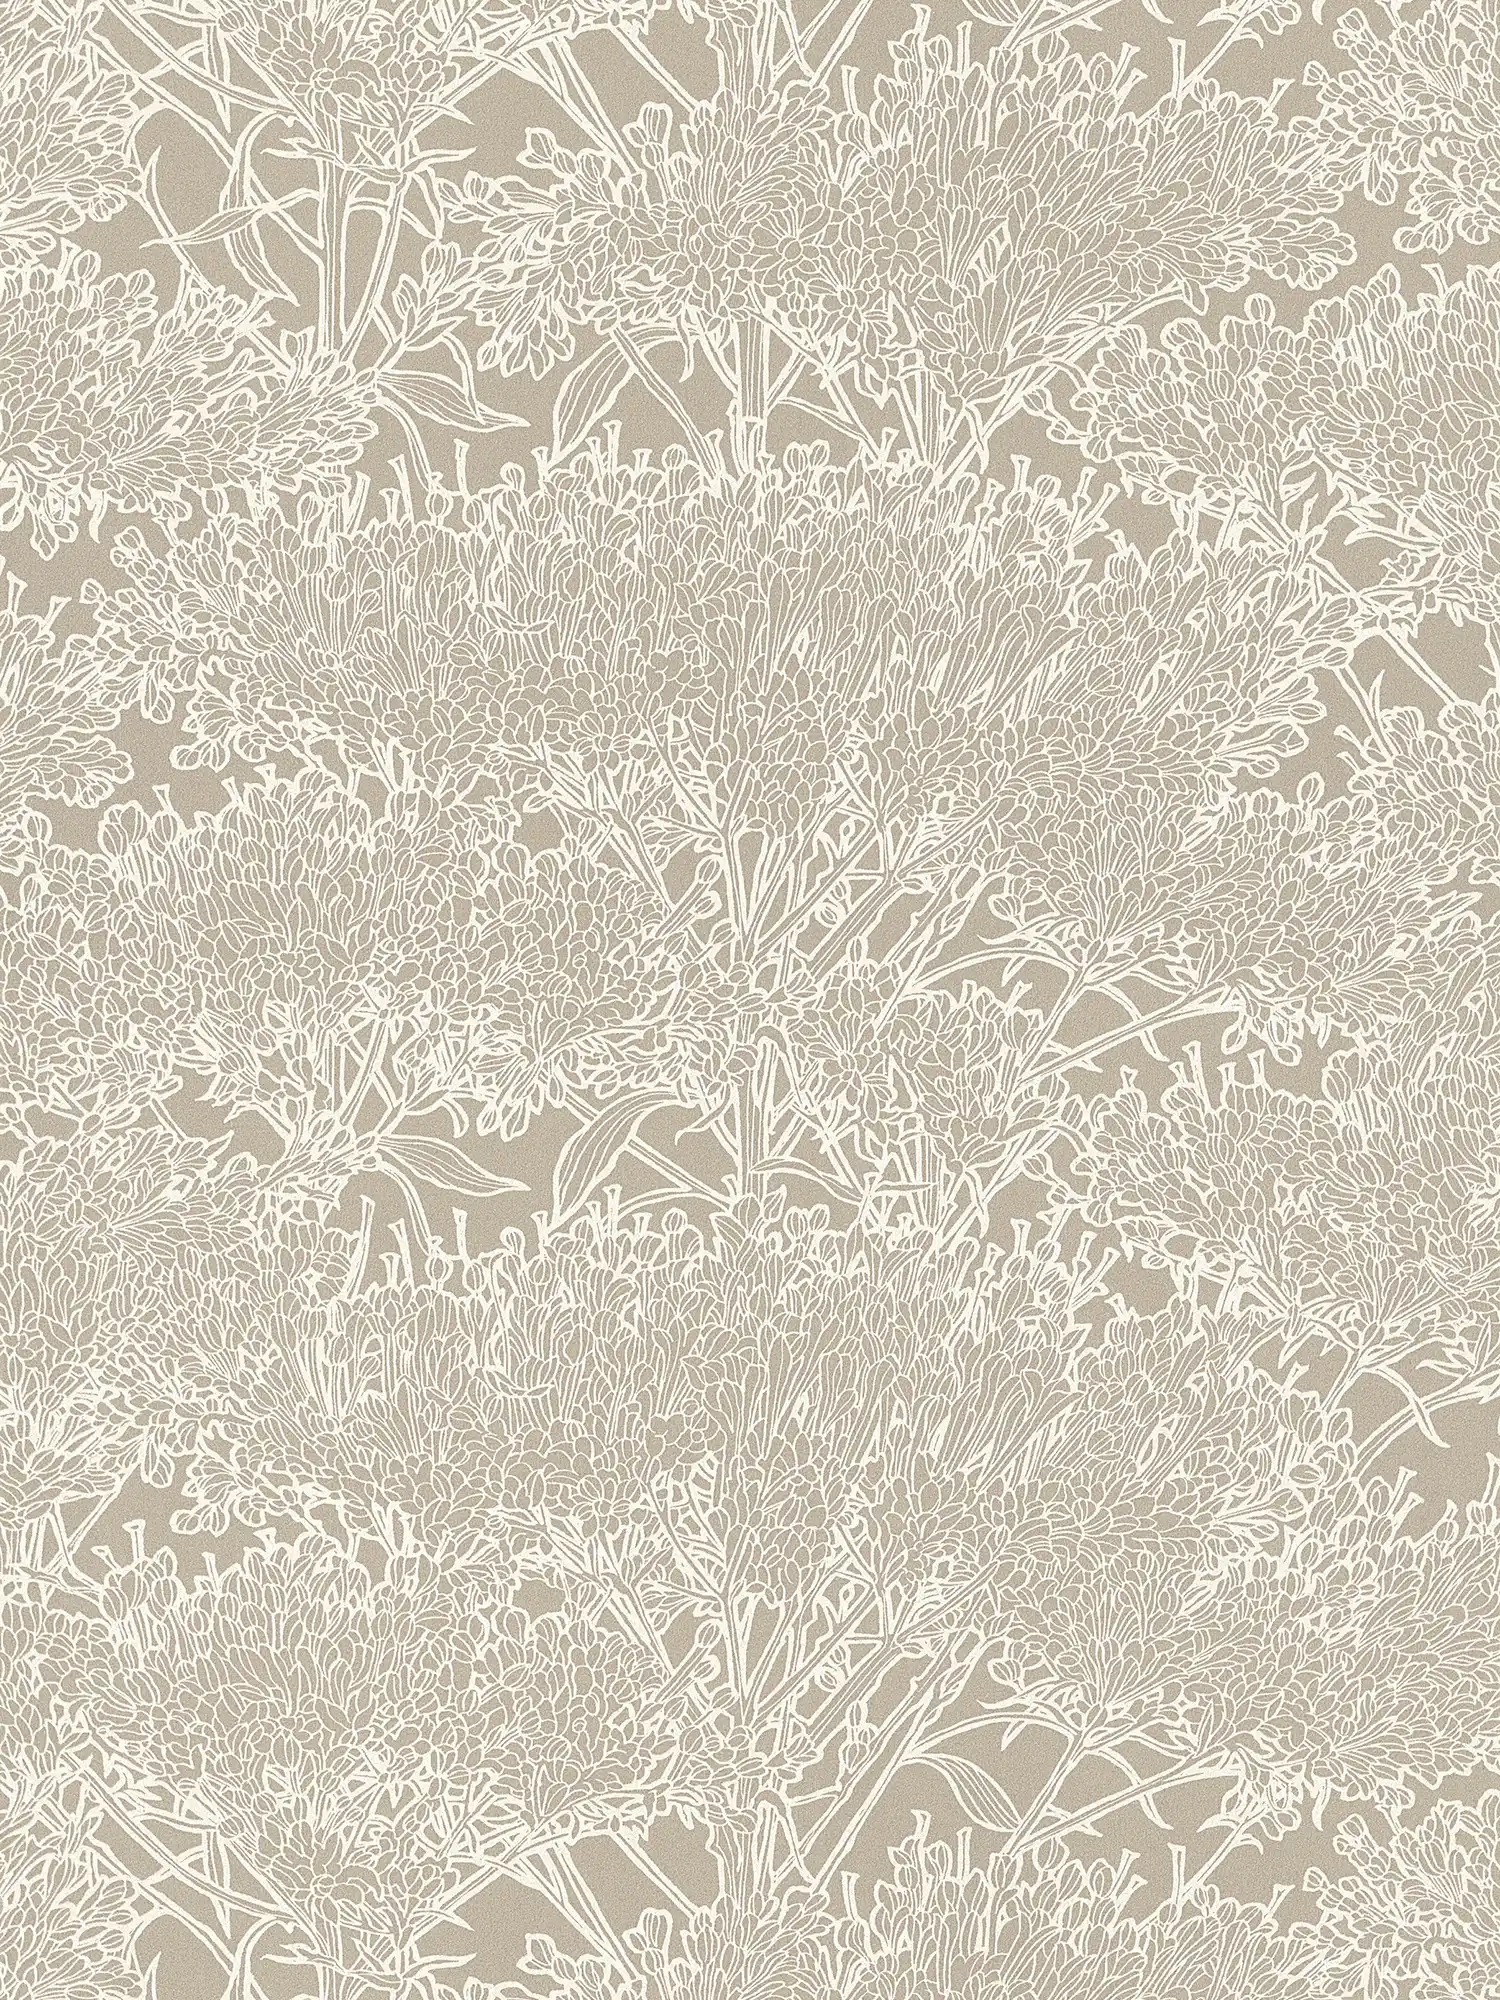 Mediterranean wallpaper sand colours with floral pattern - grey, silver, beige
